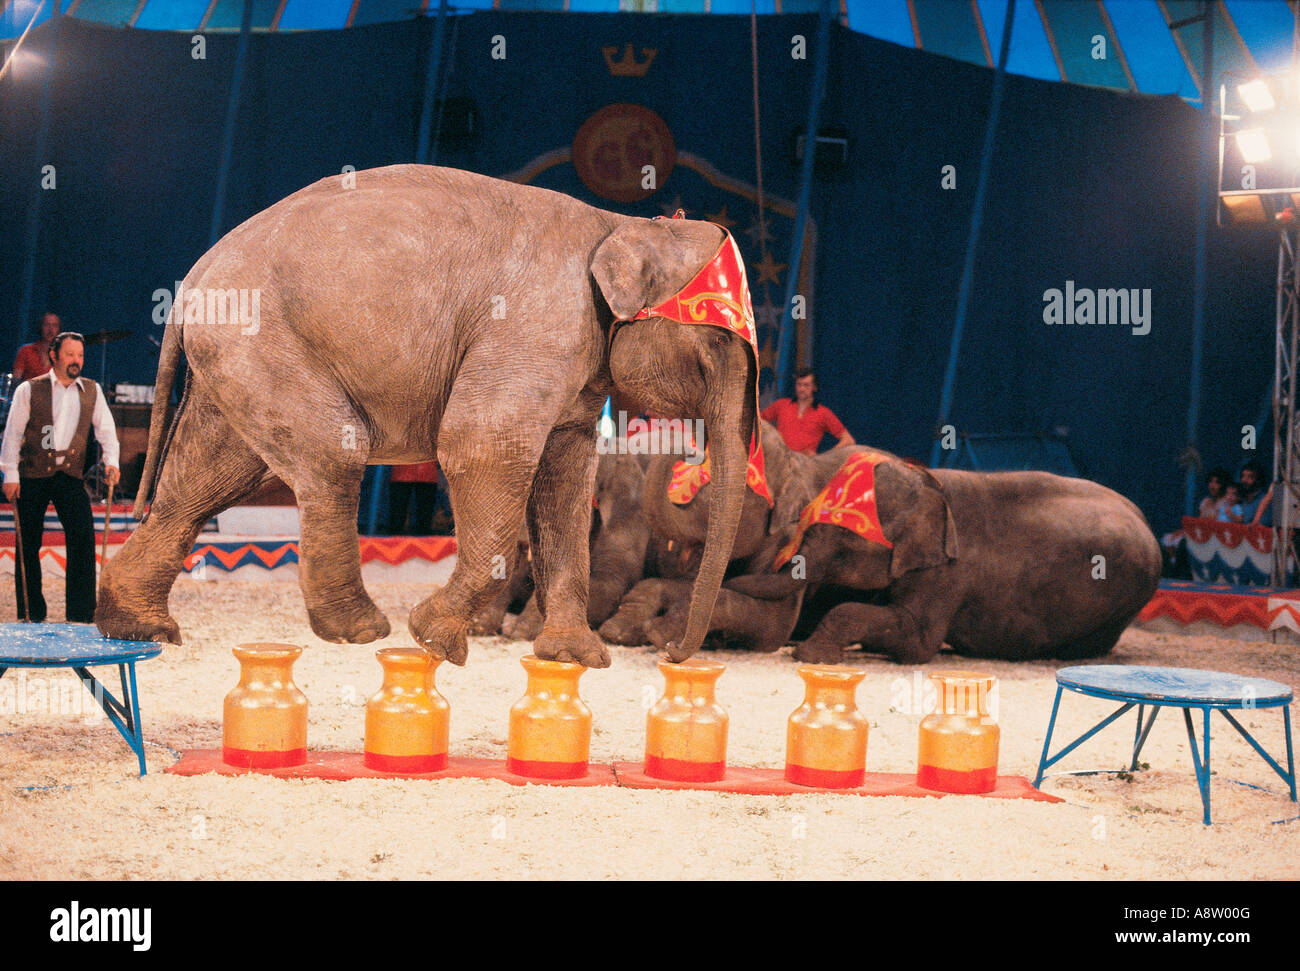 Circus Elephants act with trainer in 'big top'. Stock Photo